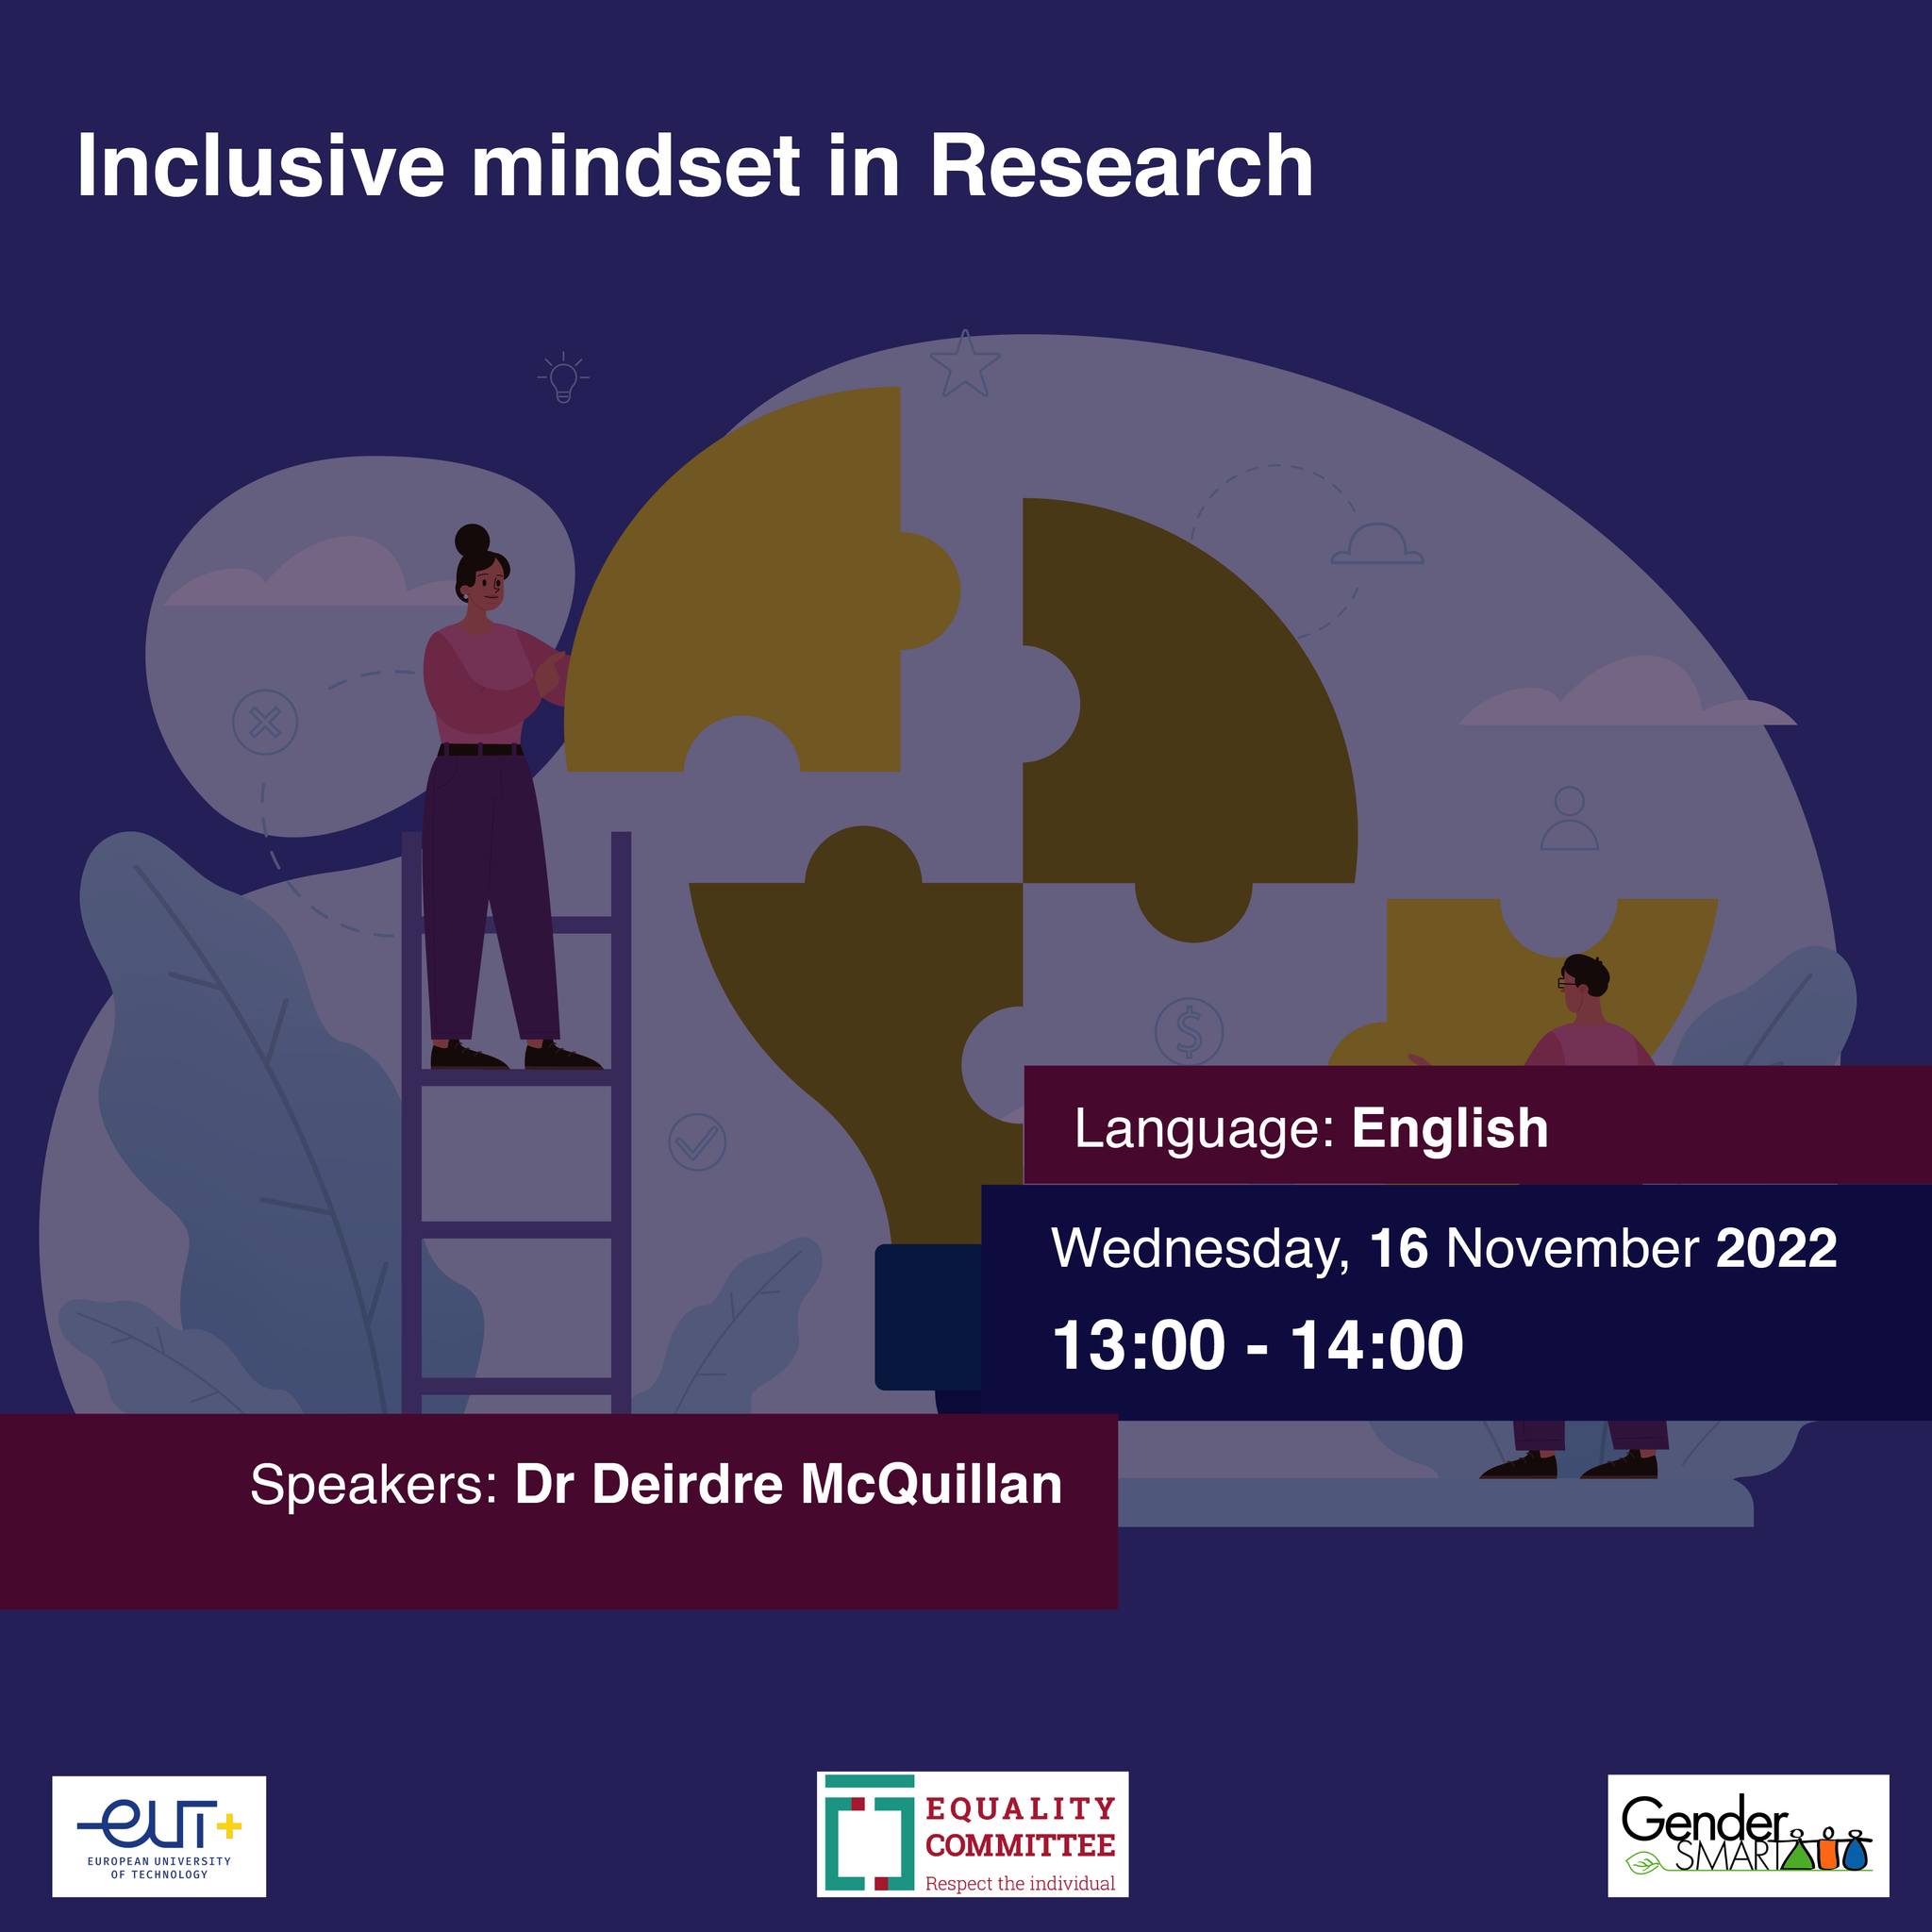 Inclusive mindset in Research organised by CUT